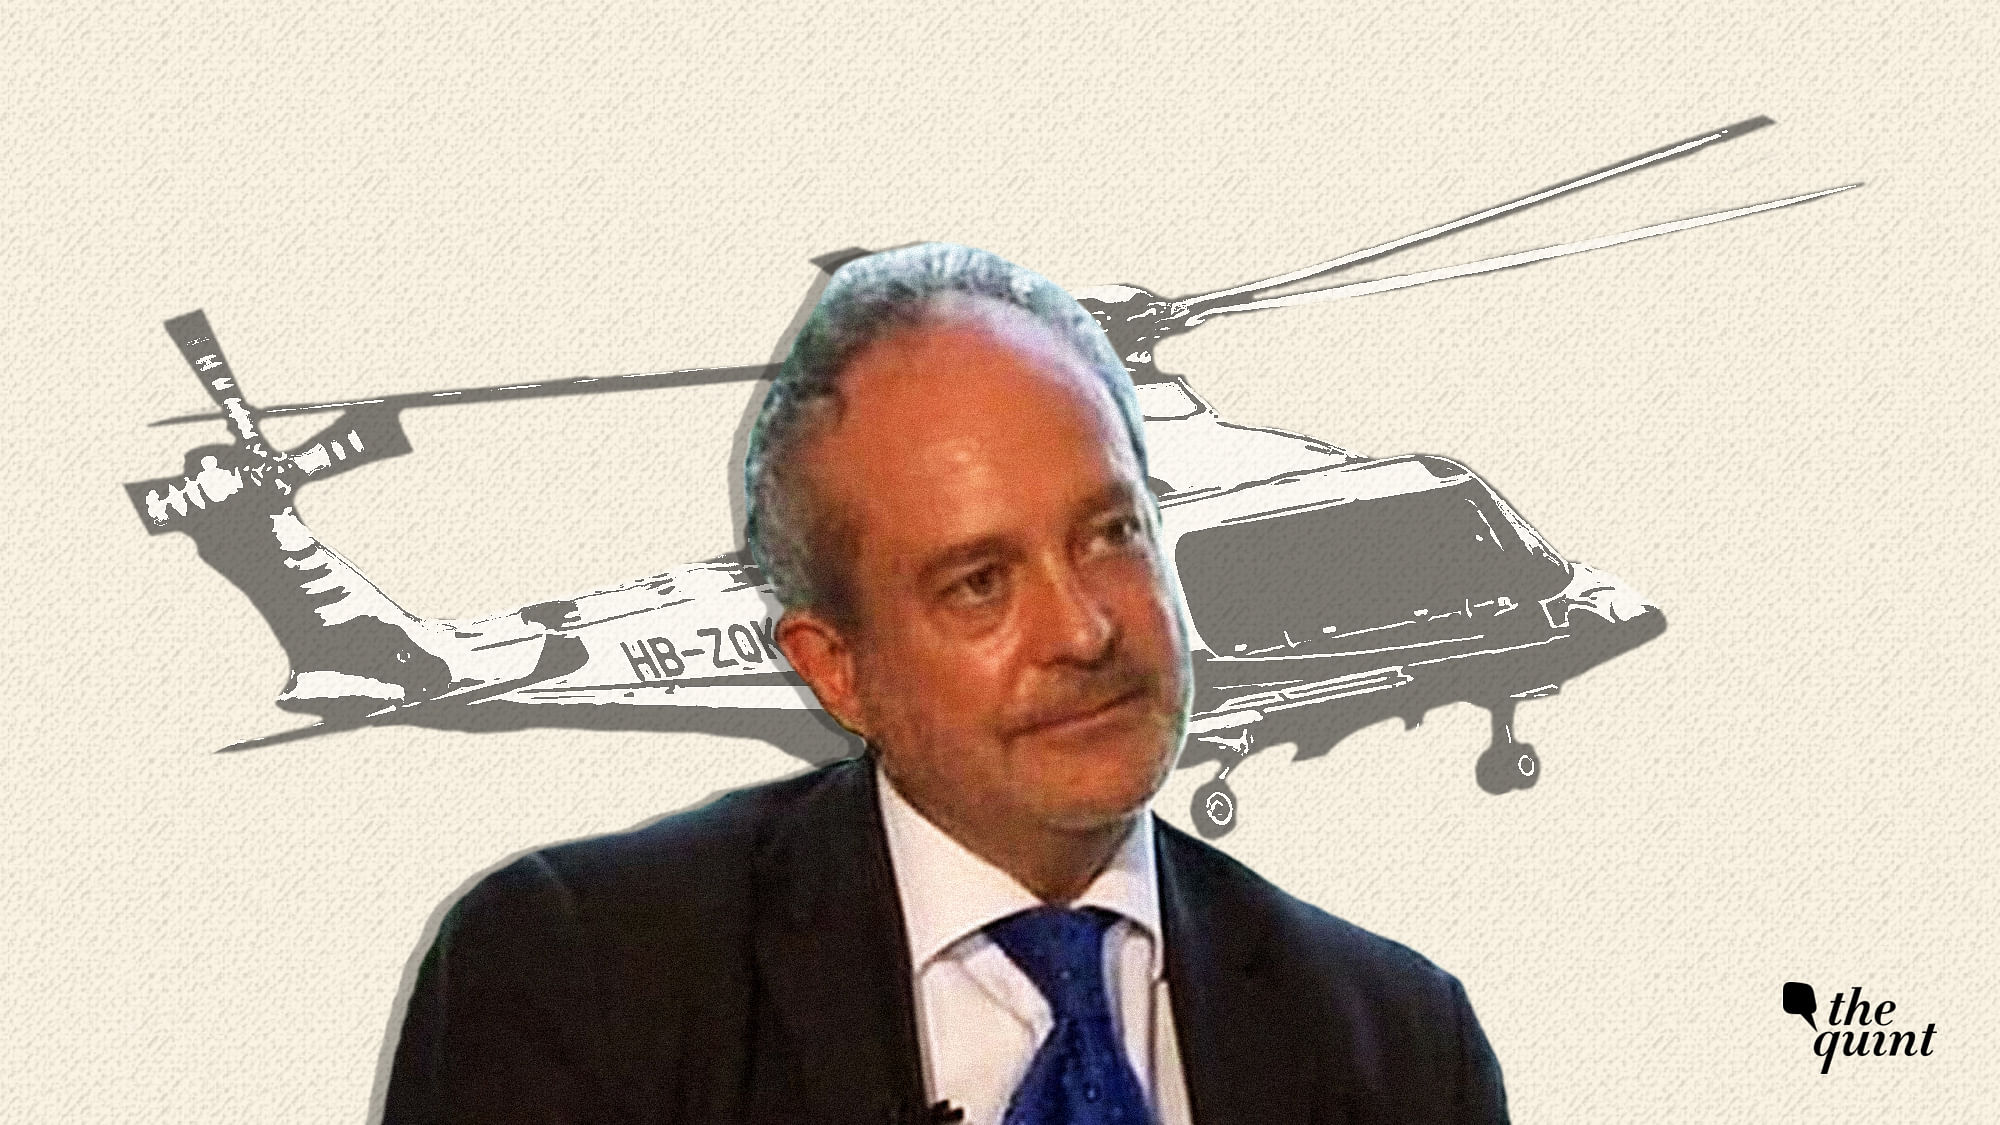 Christian Michel is one of the middlemen in the AugustaWestland deal.